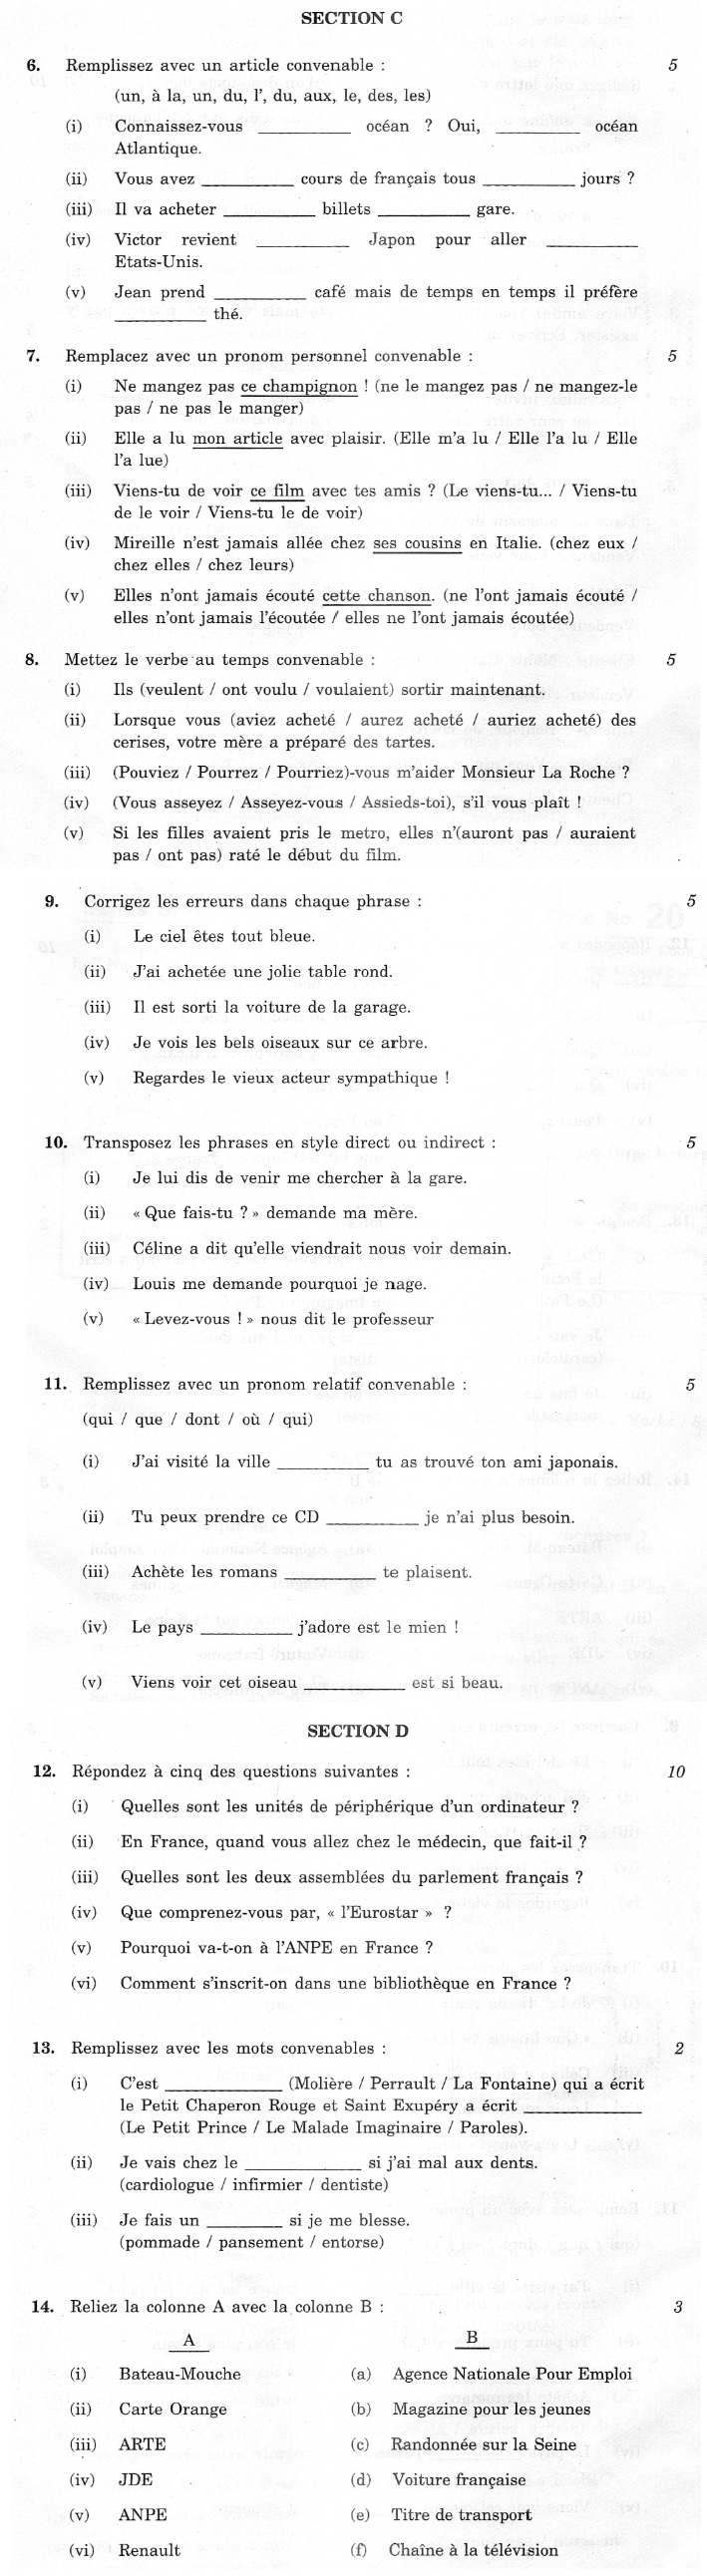 CBSE Class X Previous Year Question Papers 2012 French